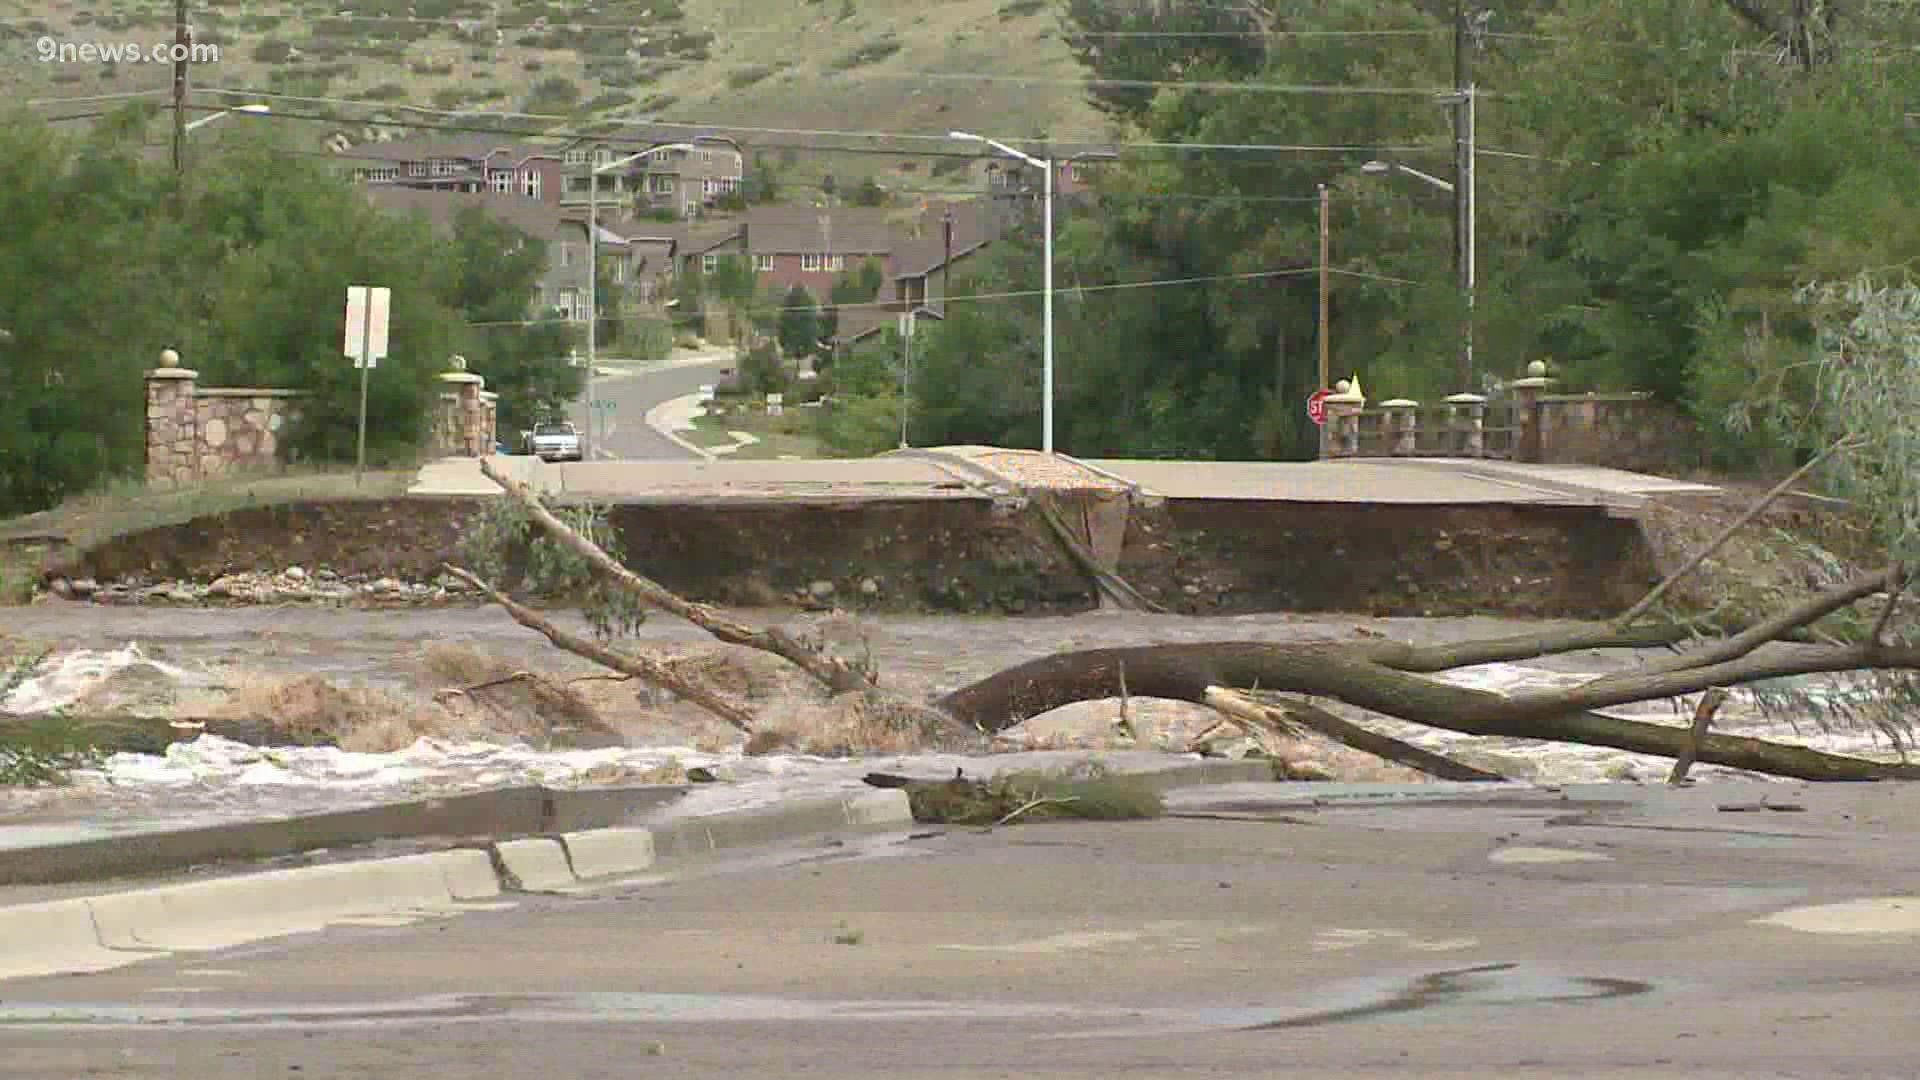 Extreme flooding events like the Front Range floods of 2013 could become four times more frequent if the Earth's atmosphere continues to warm at its current pace.